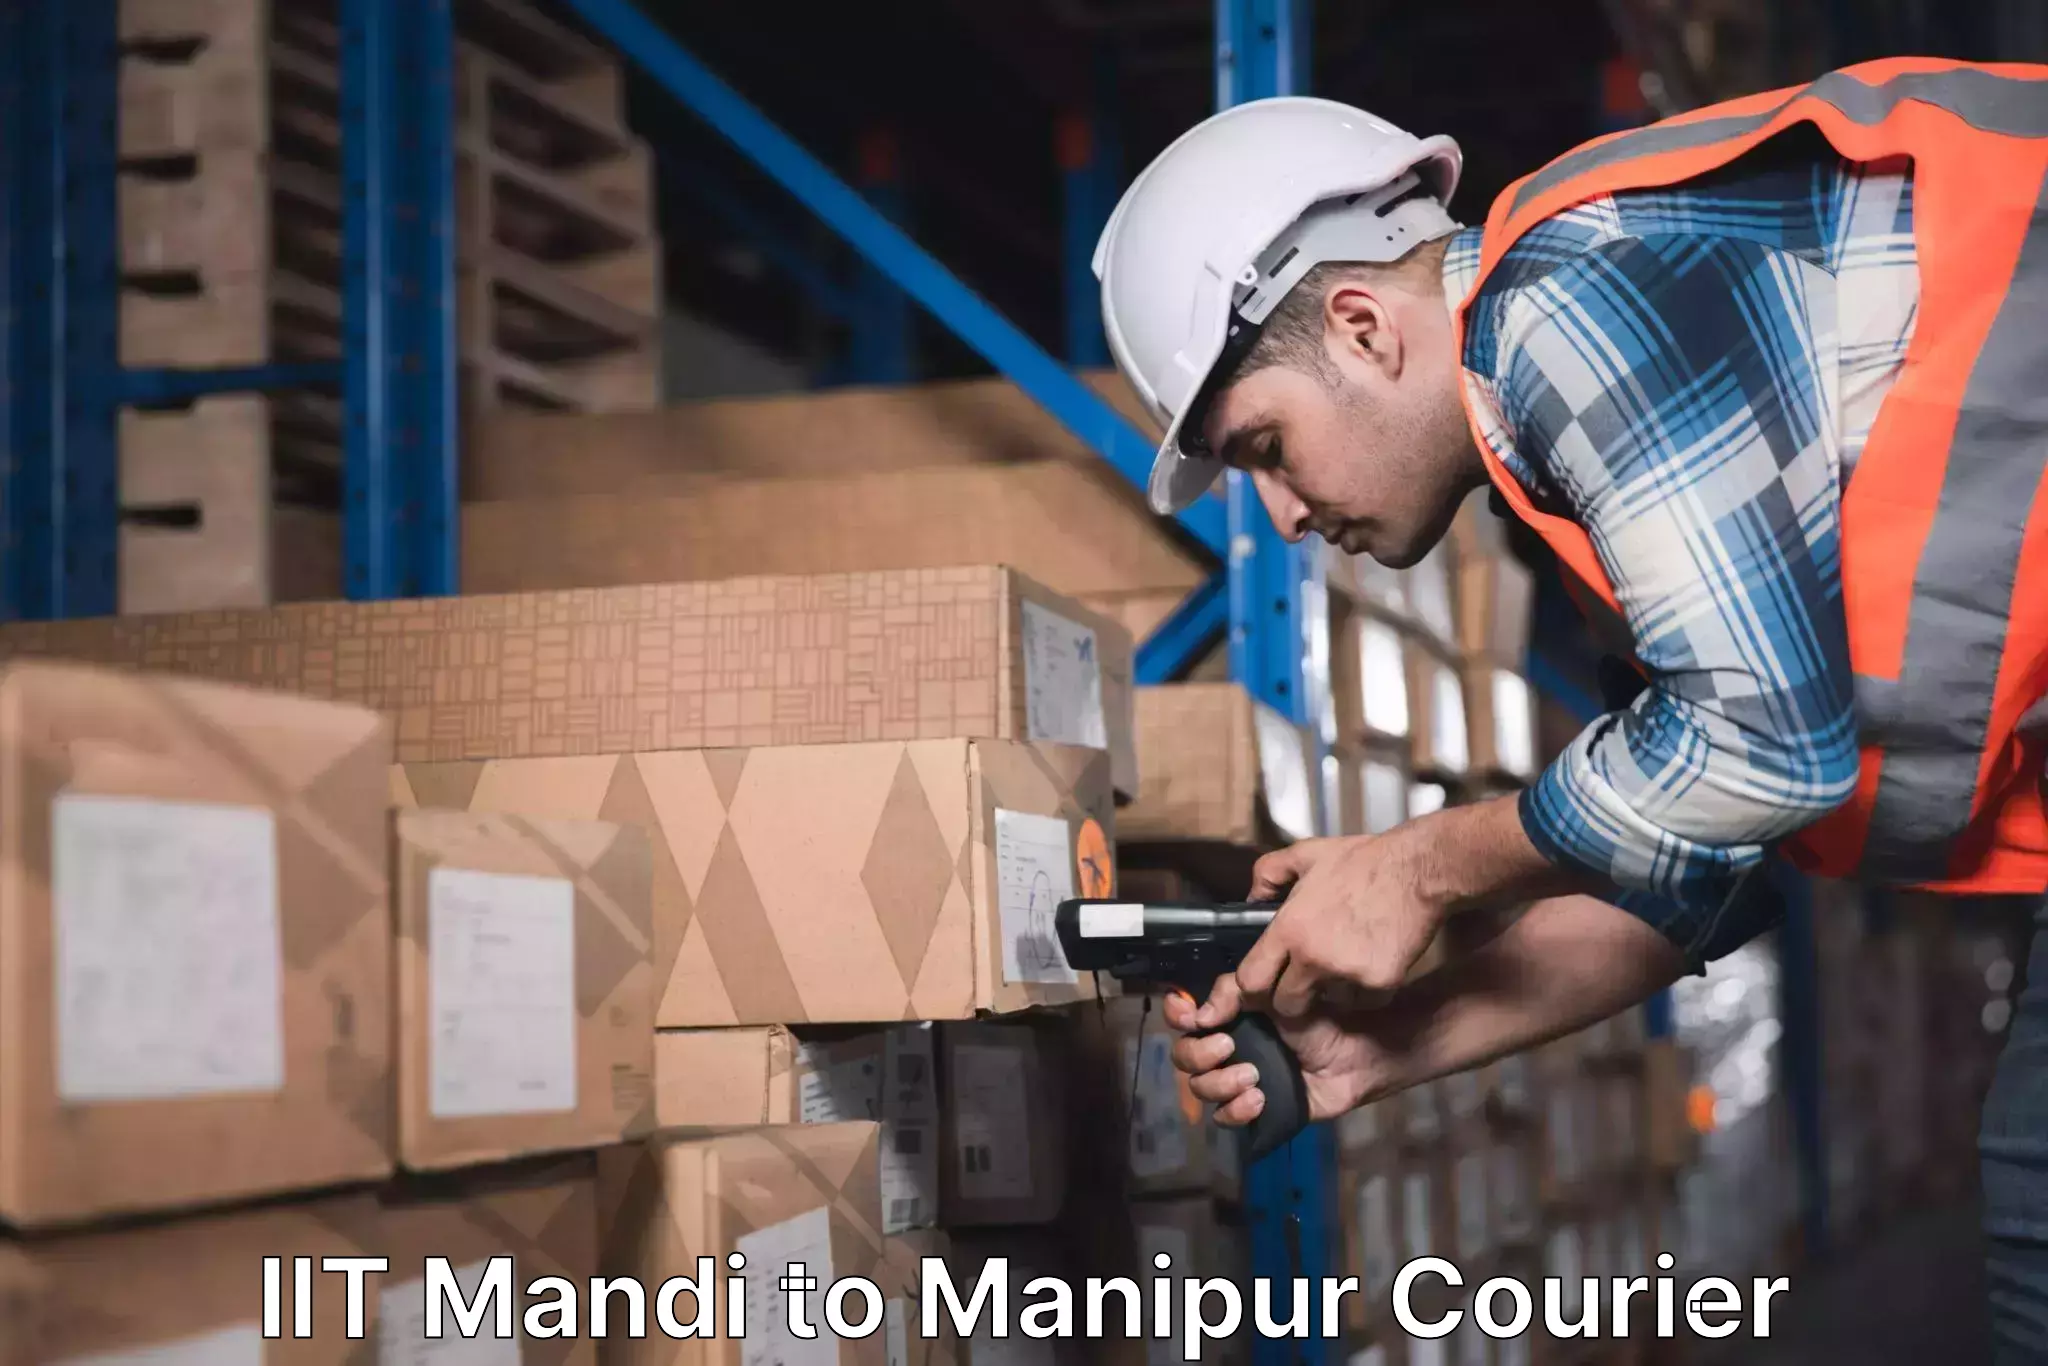 Courier service partnerships IIT Mandi to Imphal